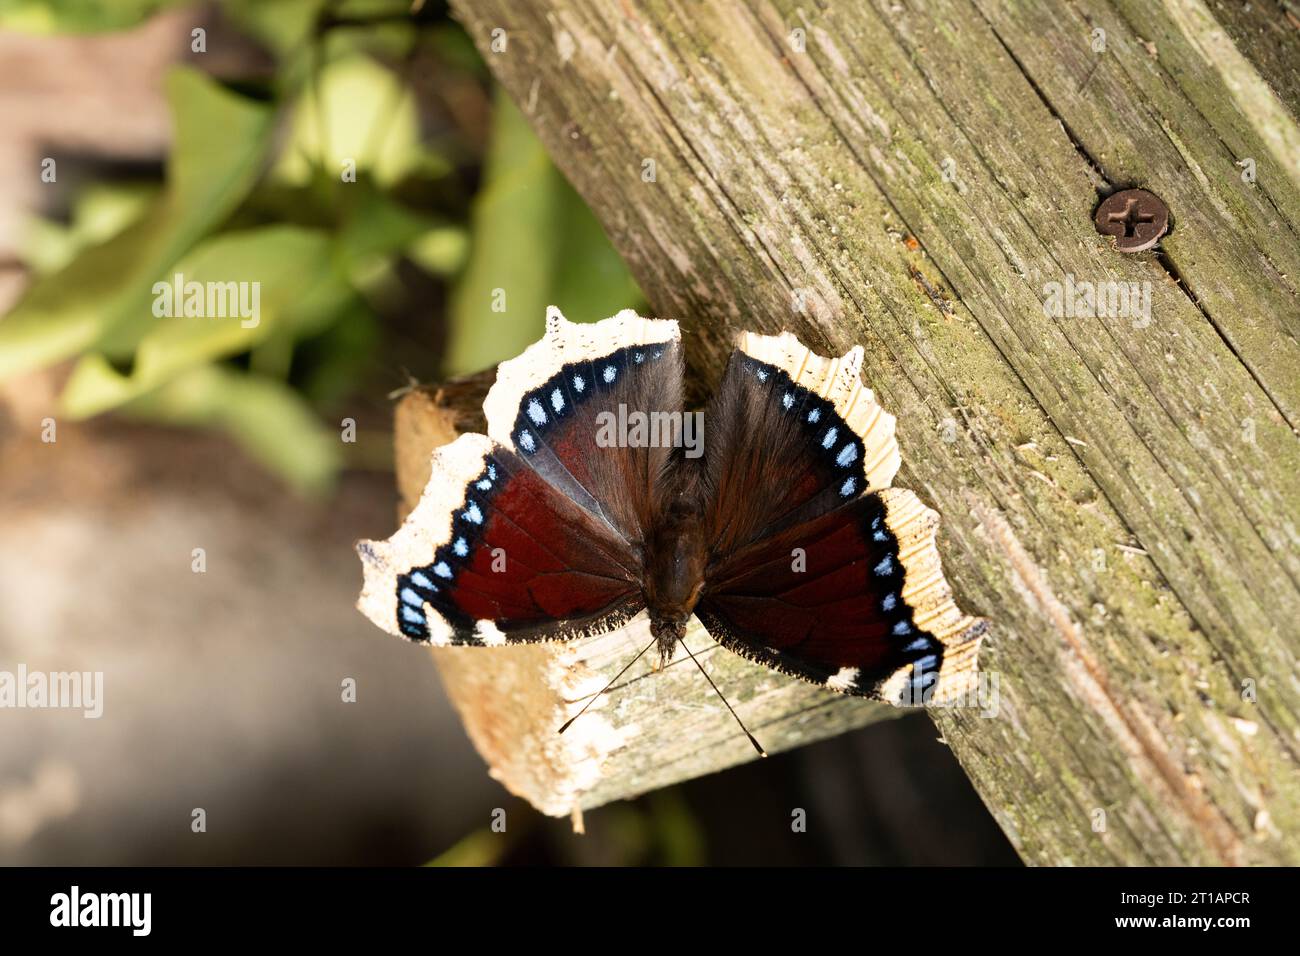 Nymphalis antiopa Family Nymphalidae Genus Nymphalis Camberwell beauty Mourning Cloak butterfly wild nature insect photography, picture, wallpaper Stock Photo